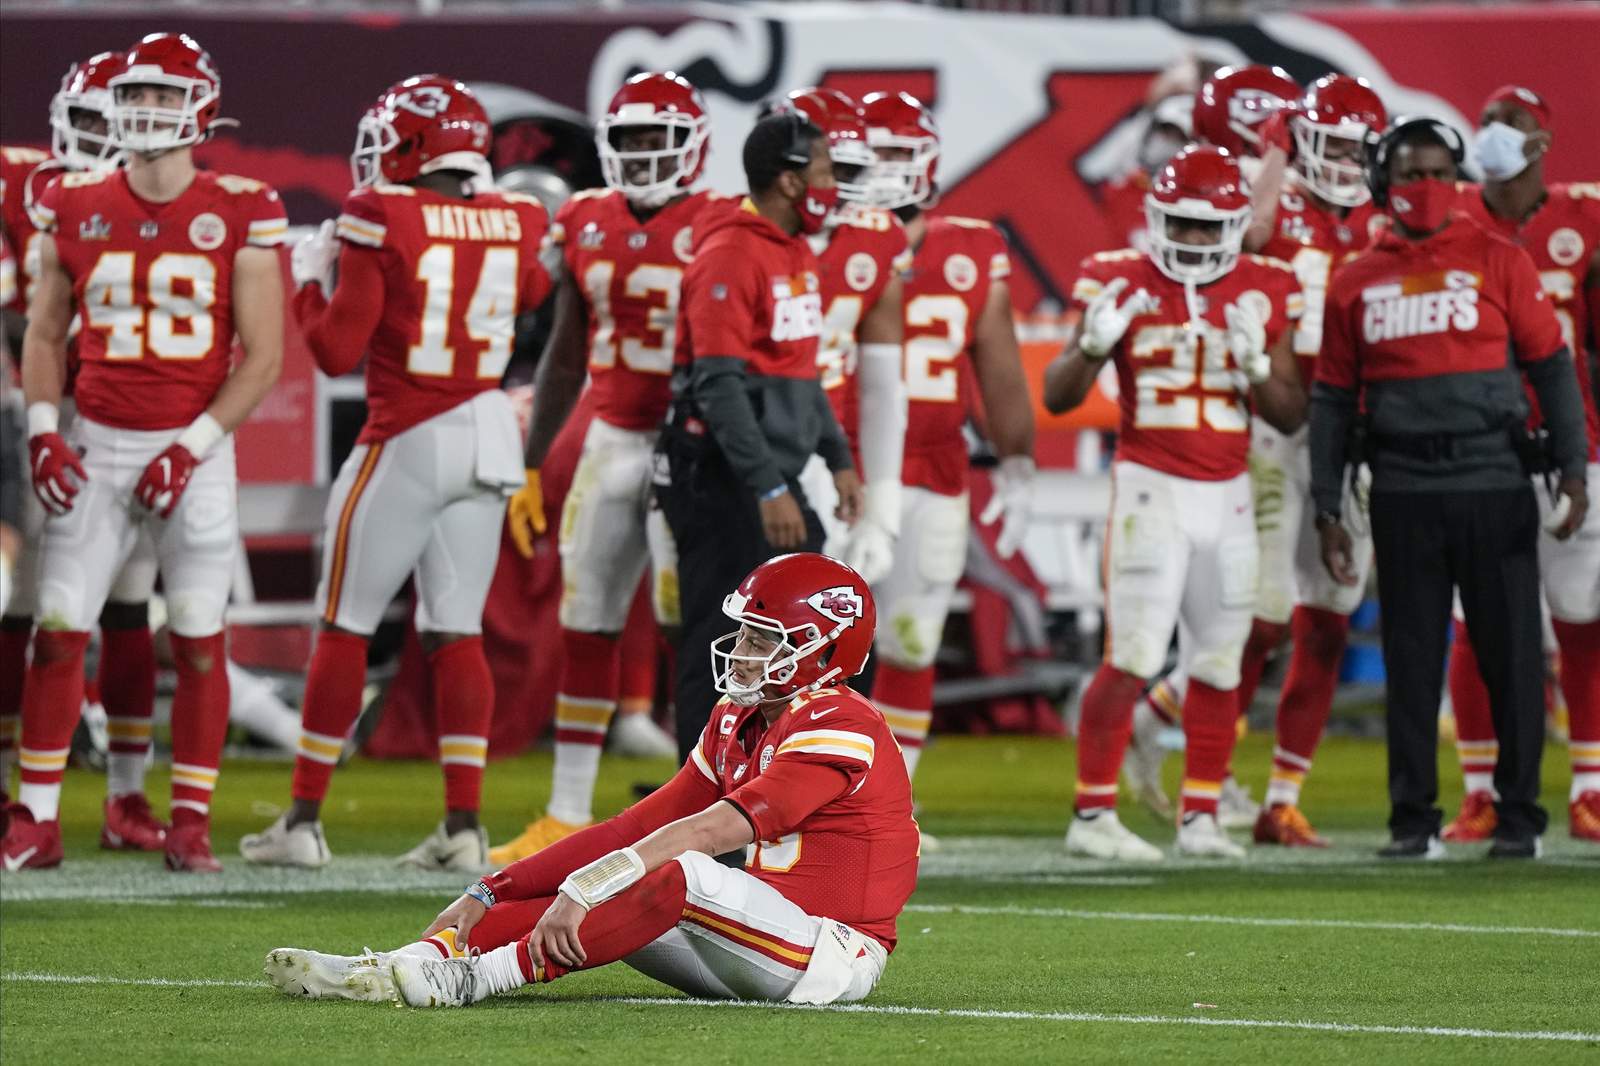 AP source: Chiefs' Mahomes to have surgery on toe injury